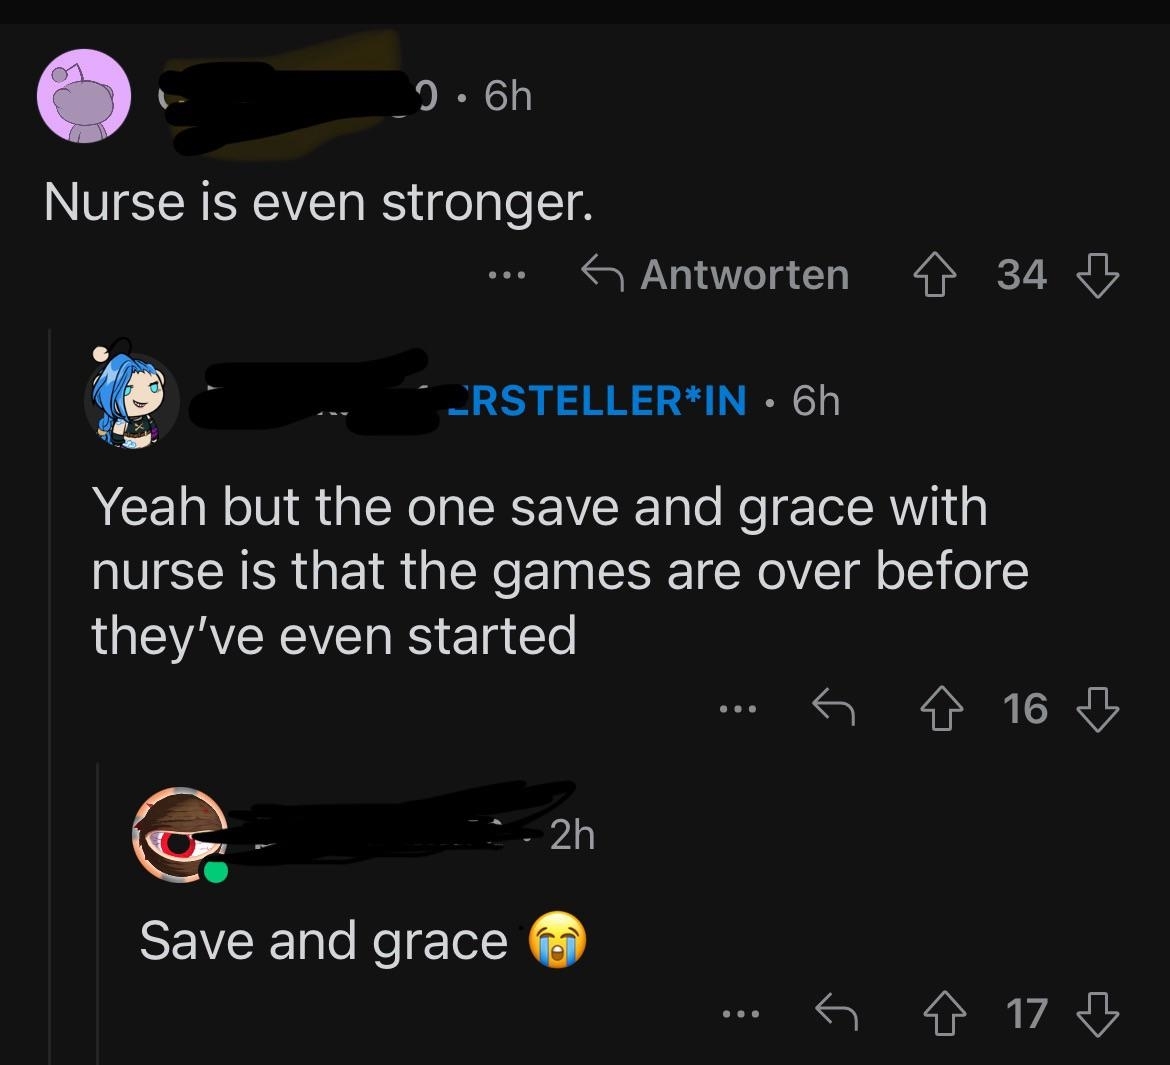 &quot;The one save and grace with nurse is that the games are over before they&#x27;re even started&quot;